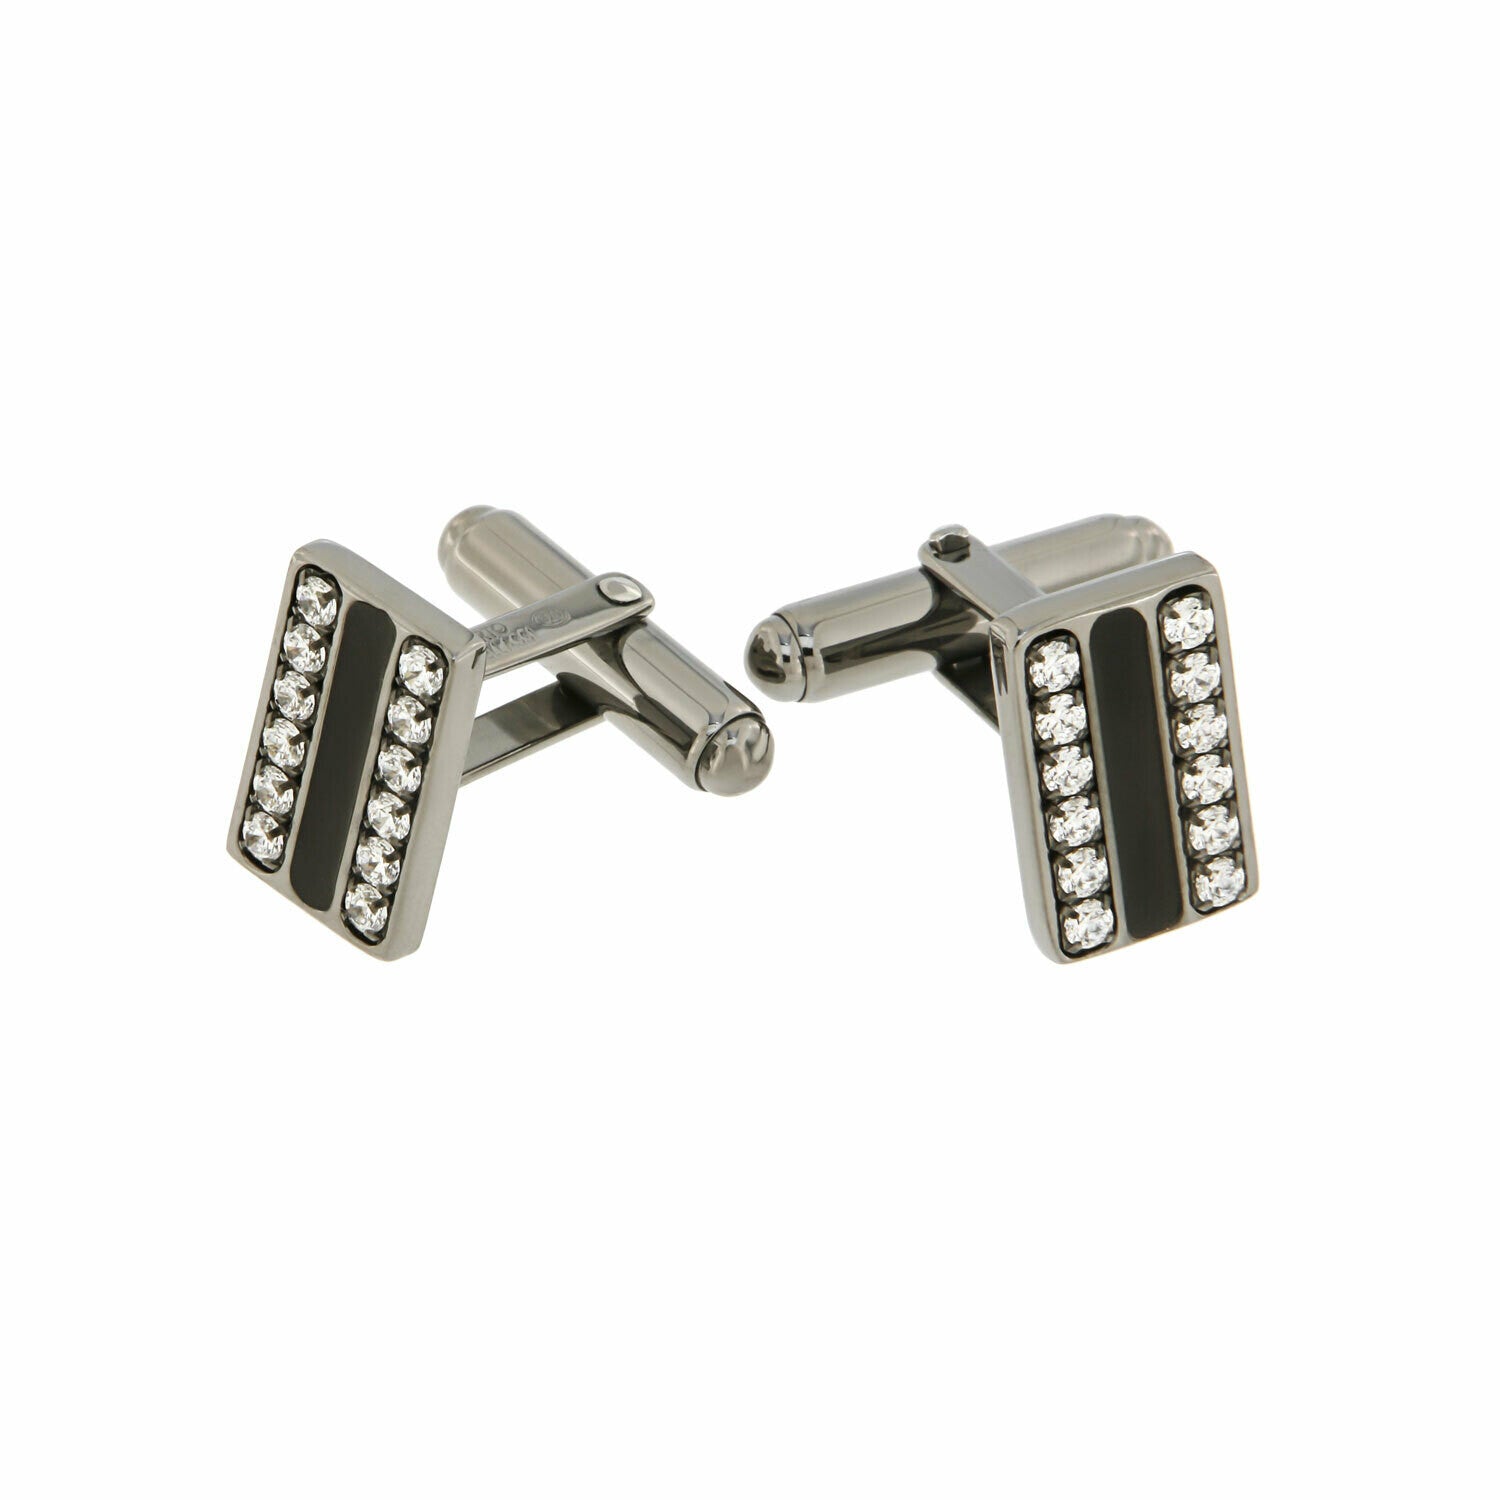 Riccardo Cufflinks in Silver with Black Enamel and Crystals for Men